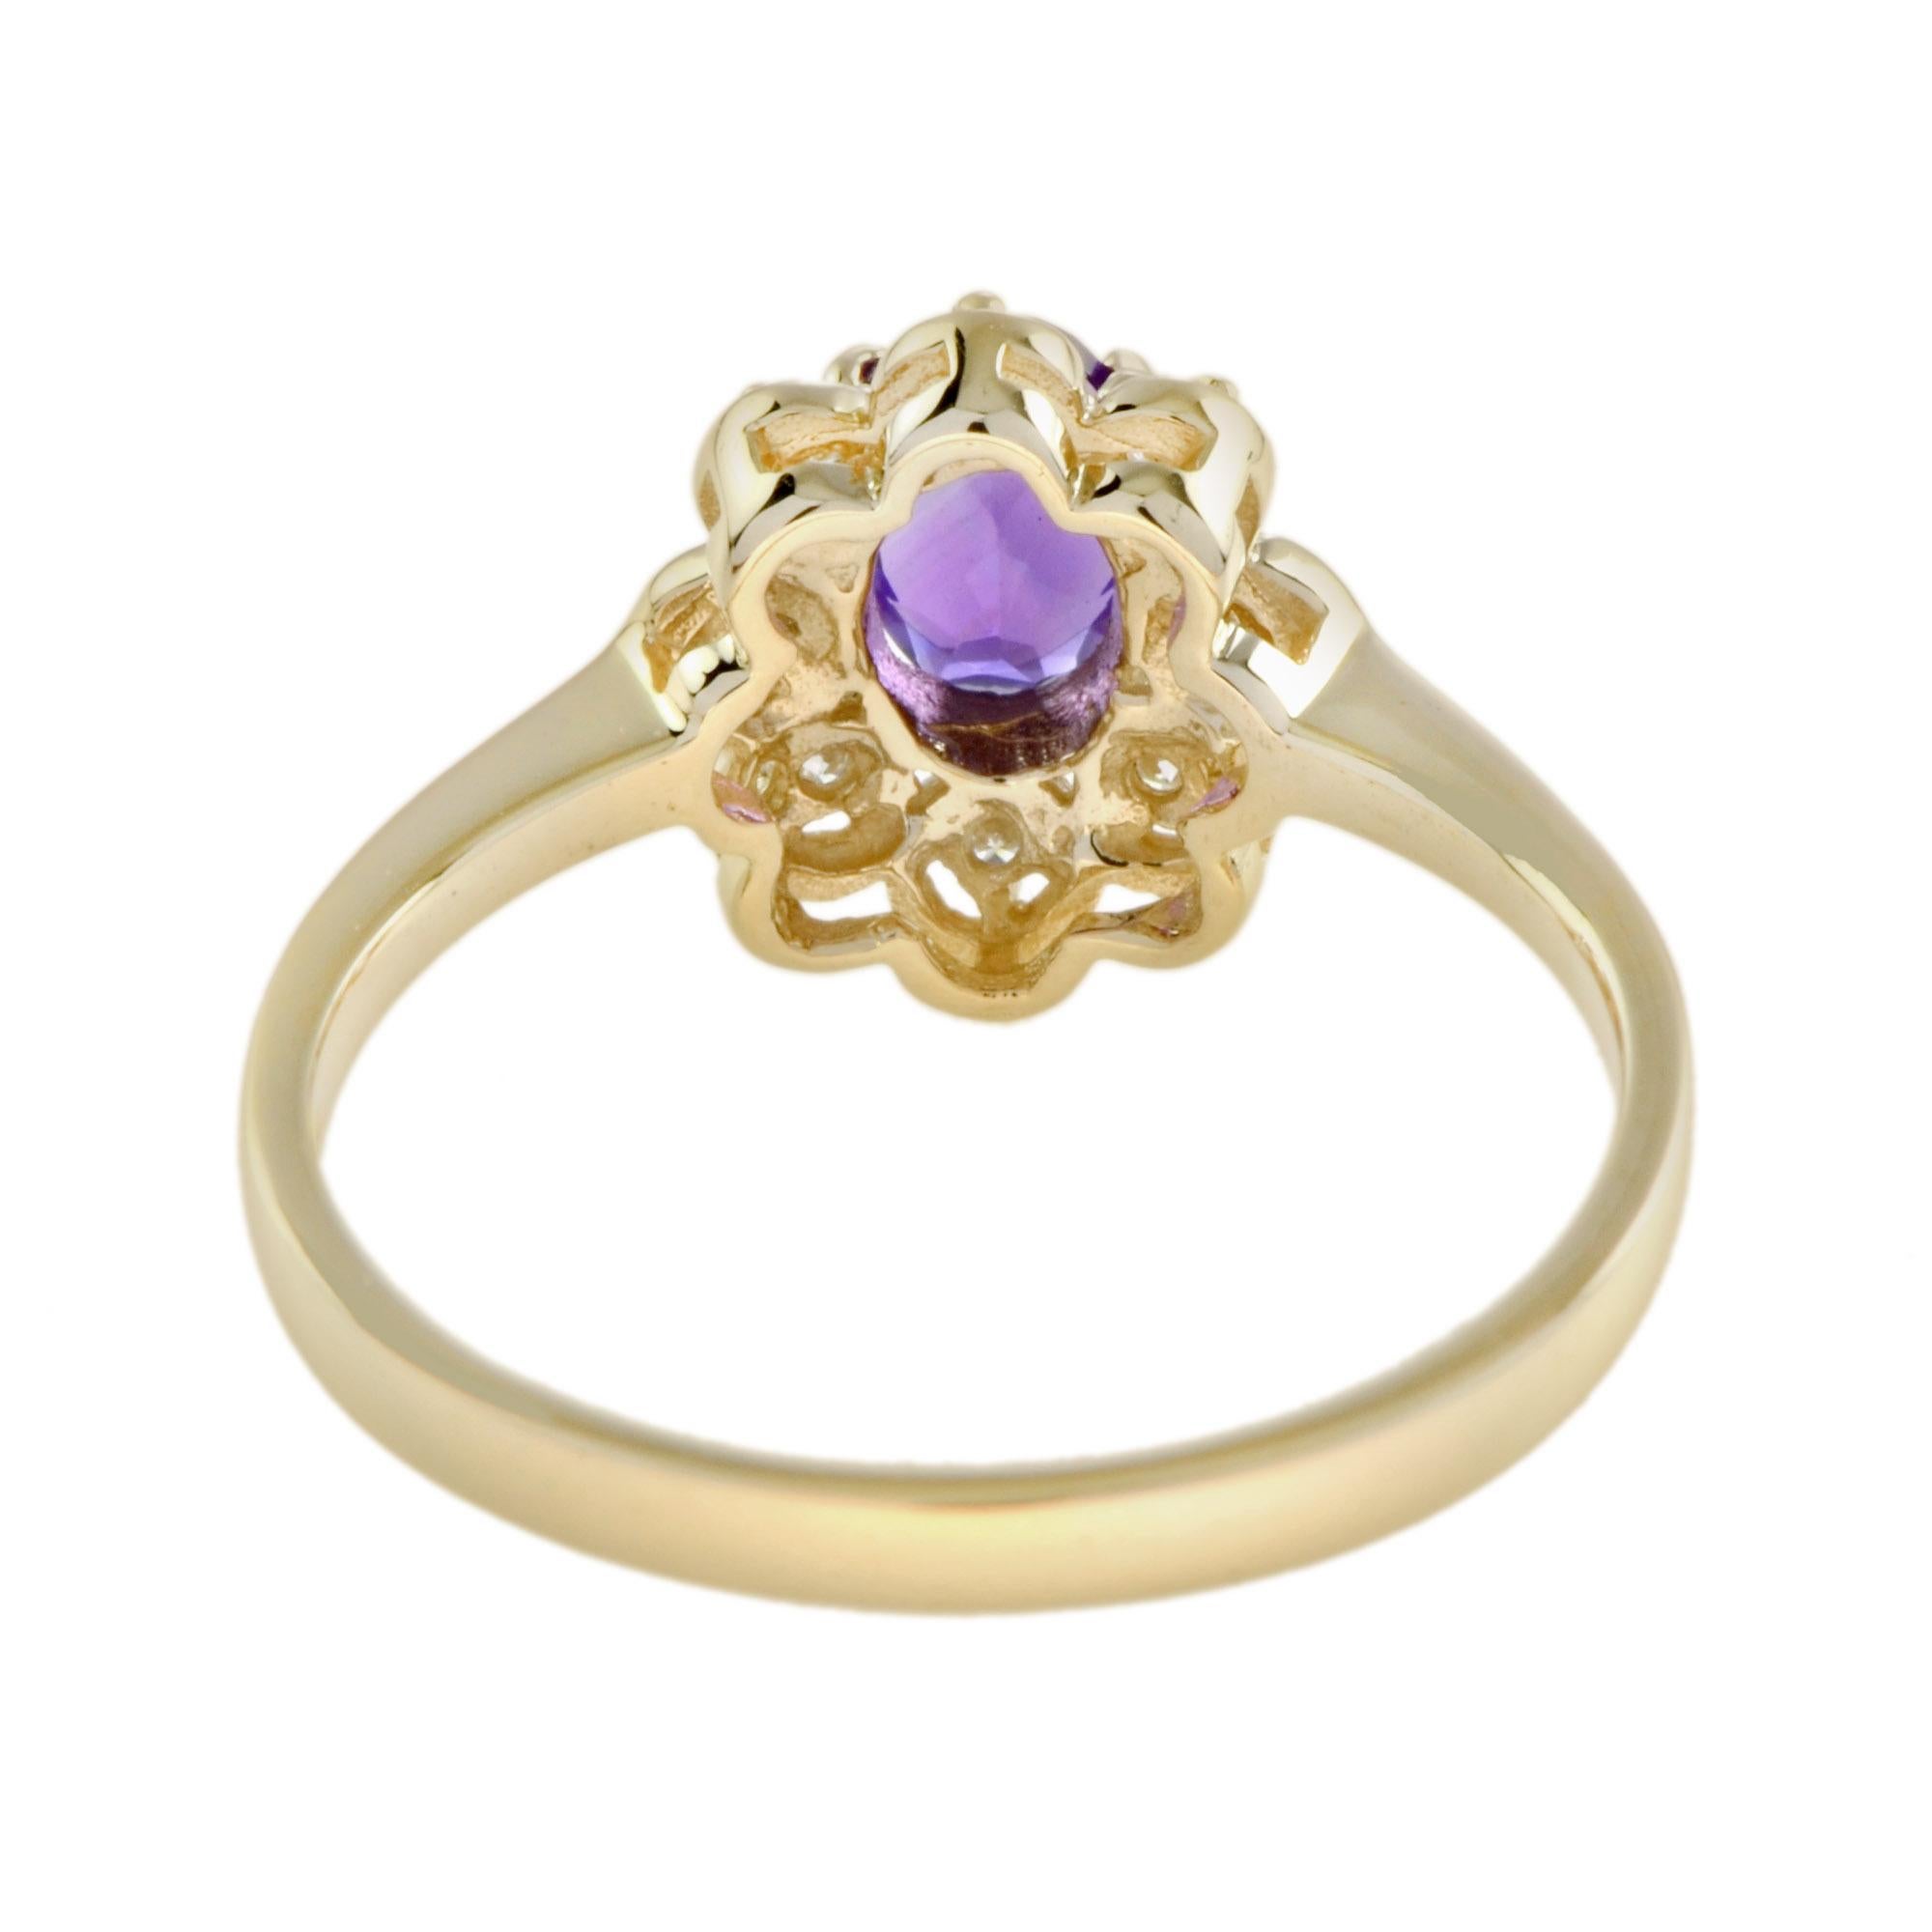 For Sale:  Vintage Style Amethyst and Diamond Halo Ring in 14K Yellow Gold 4